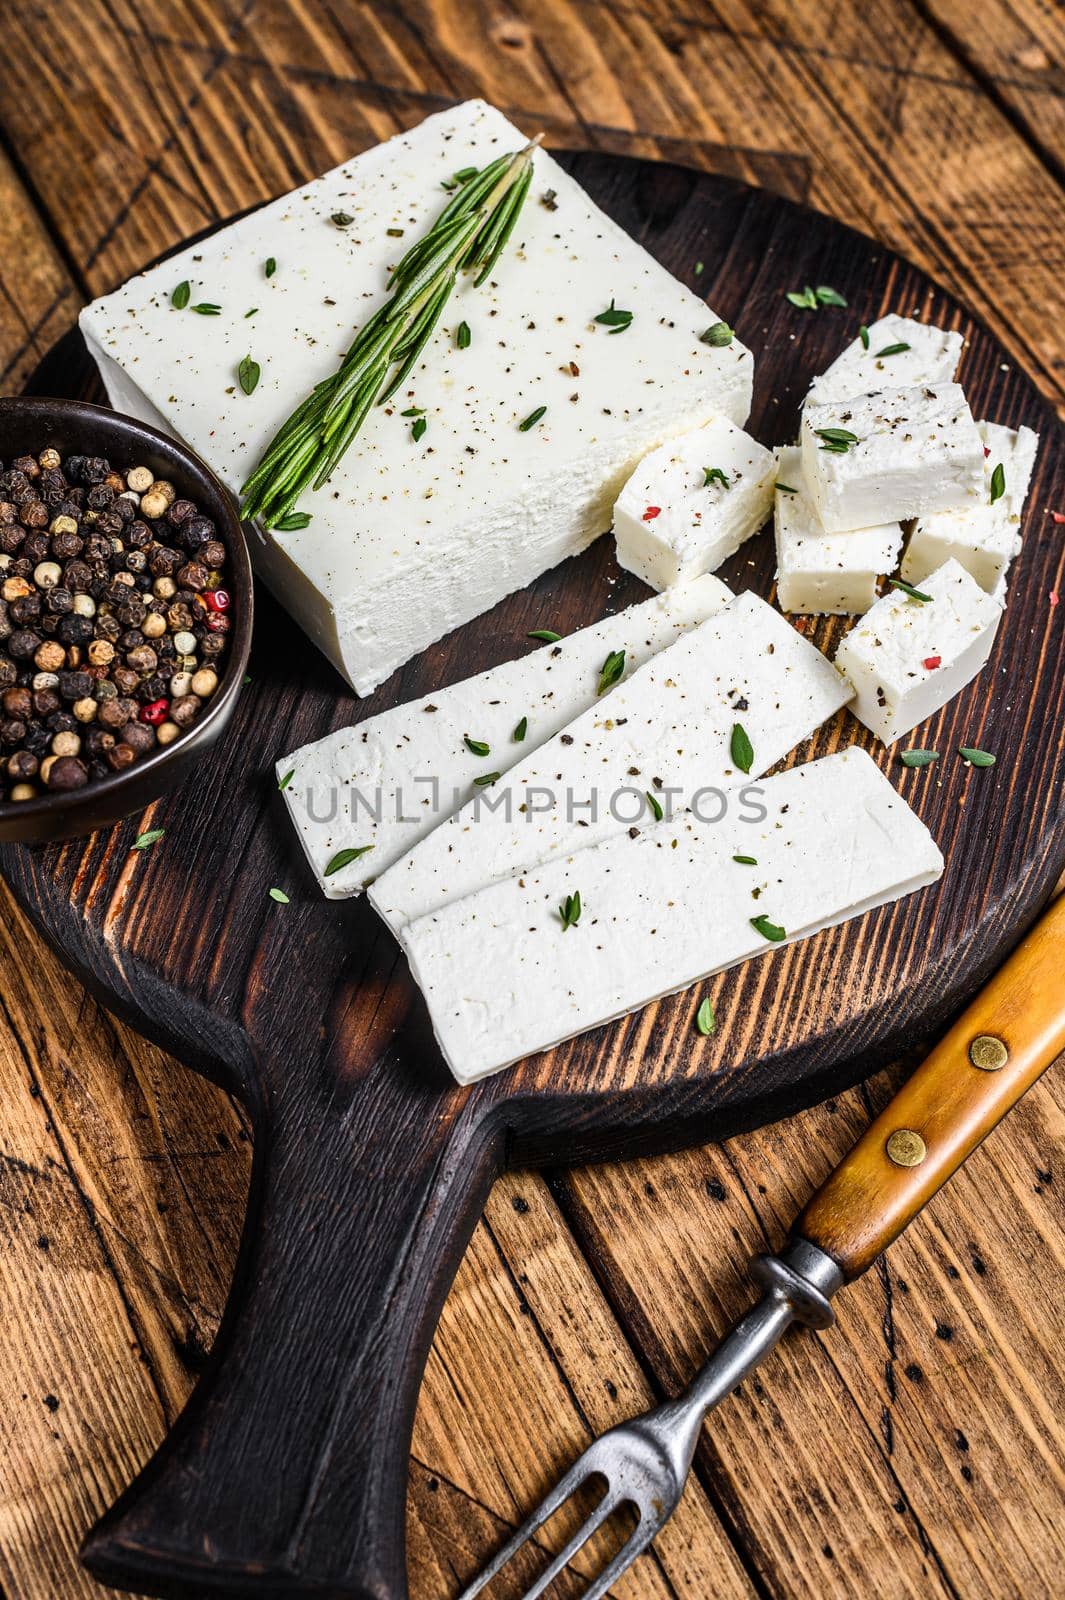 Cut cheese feta with rosemary on a wooden cutting board. wooden background. Top view by Composter